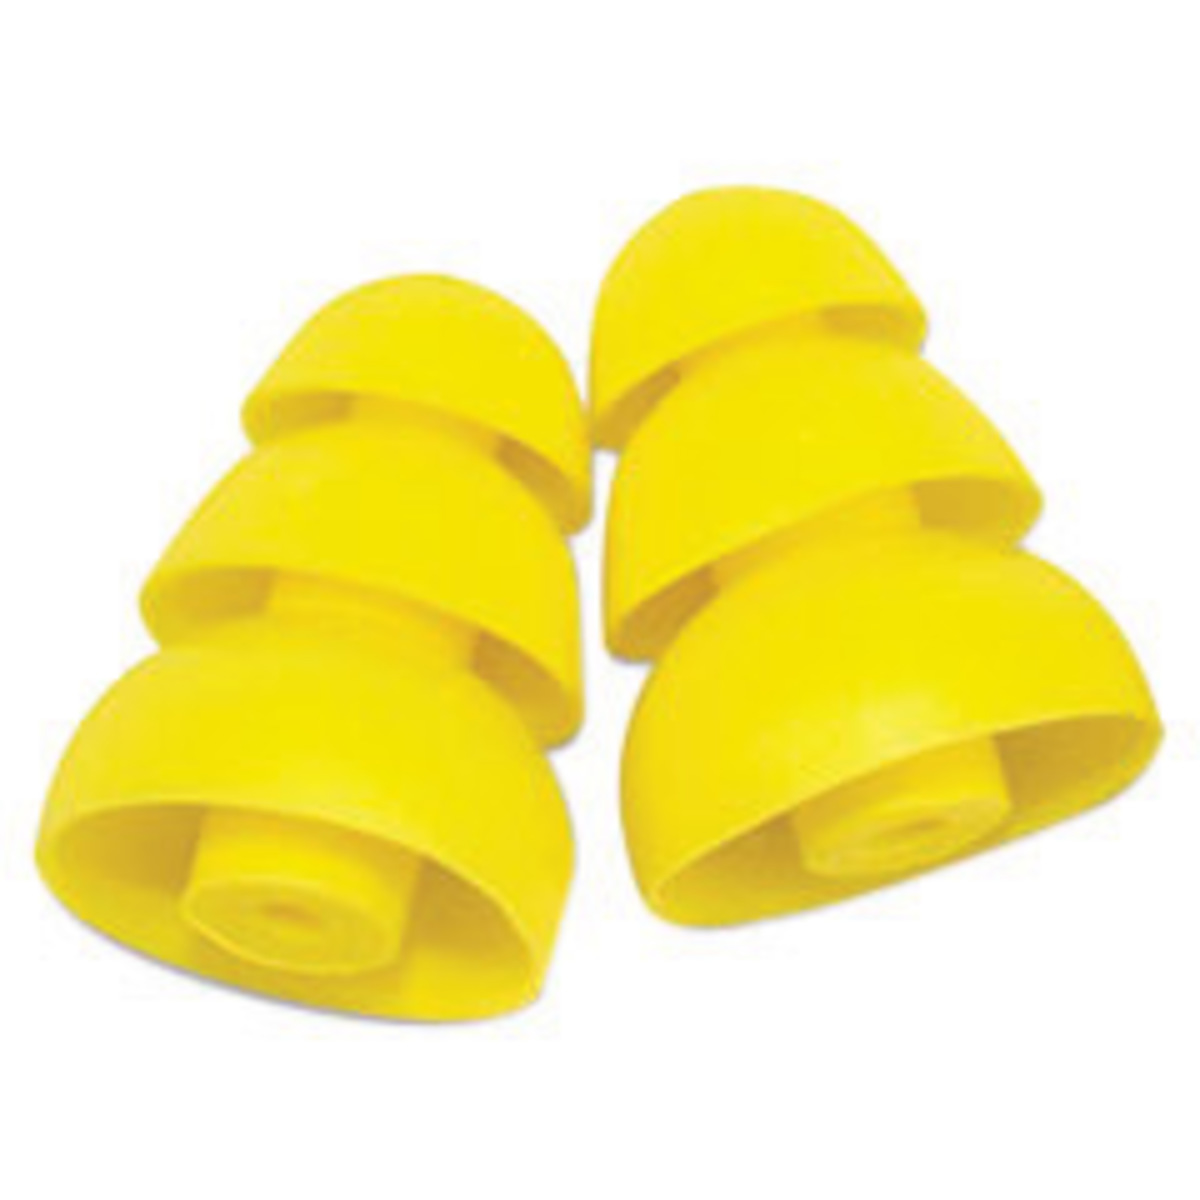 3M™ Peltor™ E-A-R buds™ Yellow Replacement Tips